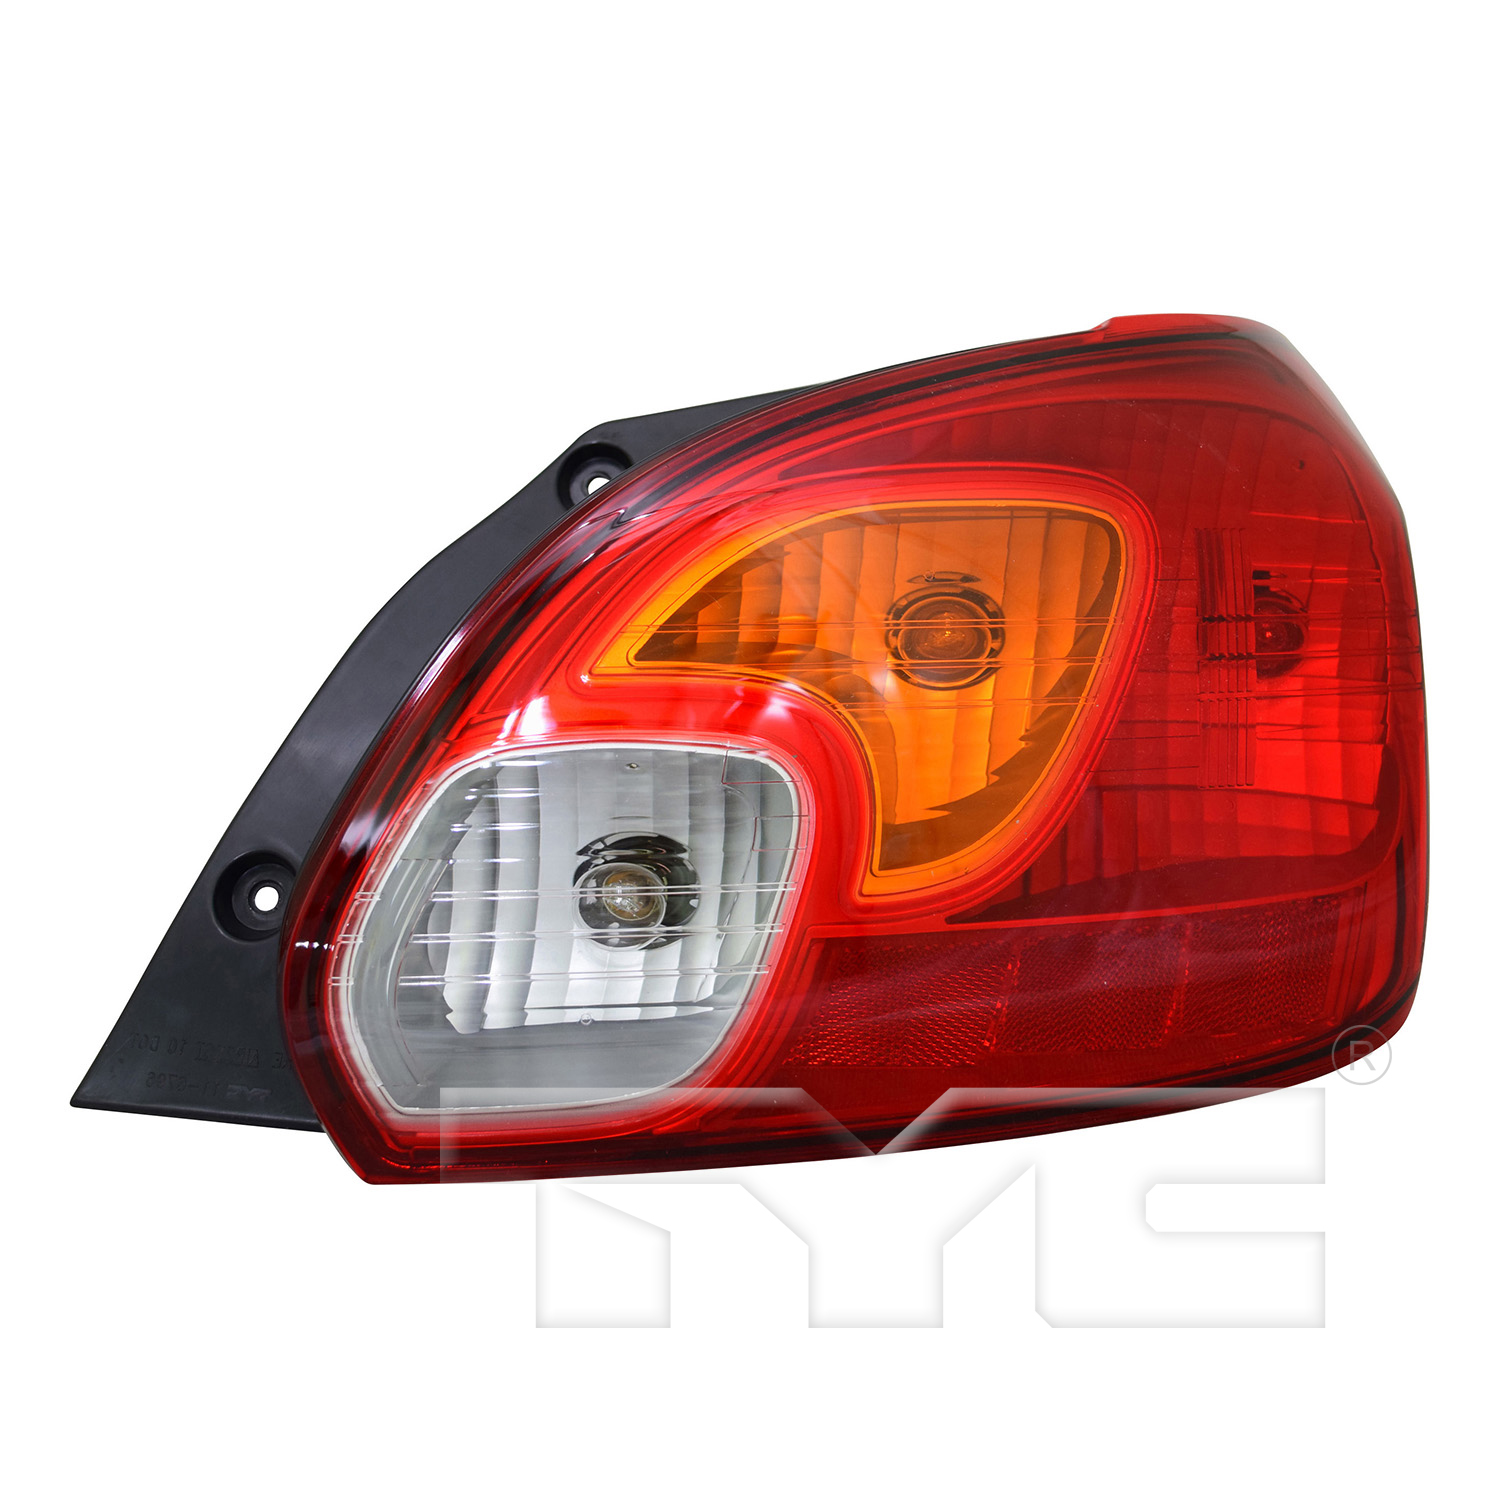 Aftermarket TAILLIGHTS for MITSUBISHI - MIRAGE, MIRAGE,14-15,RT Taillamp assy